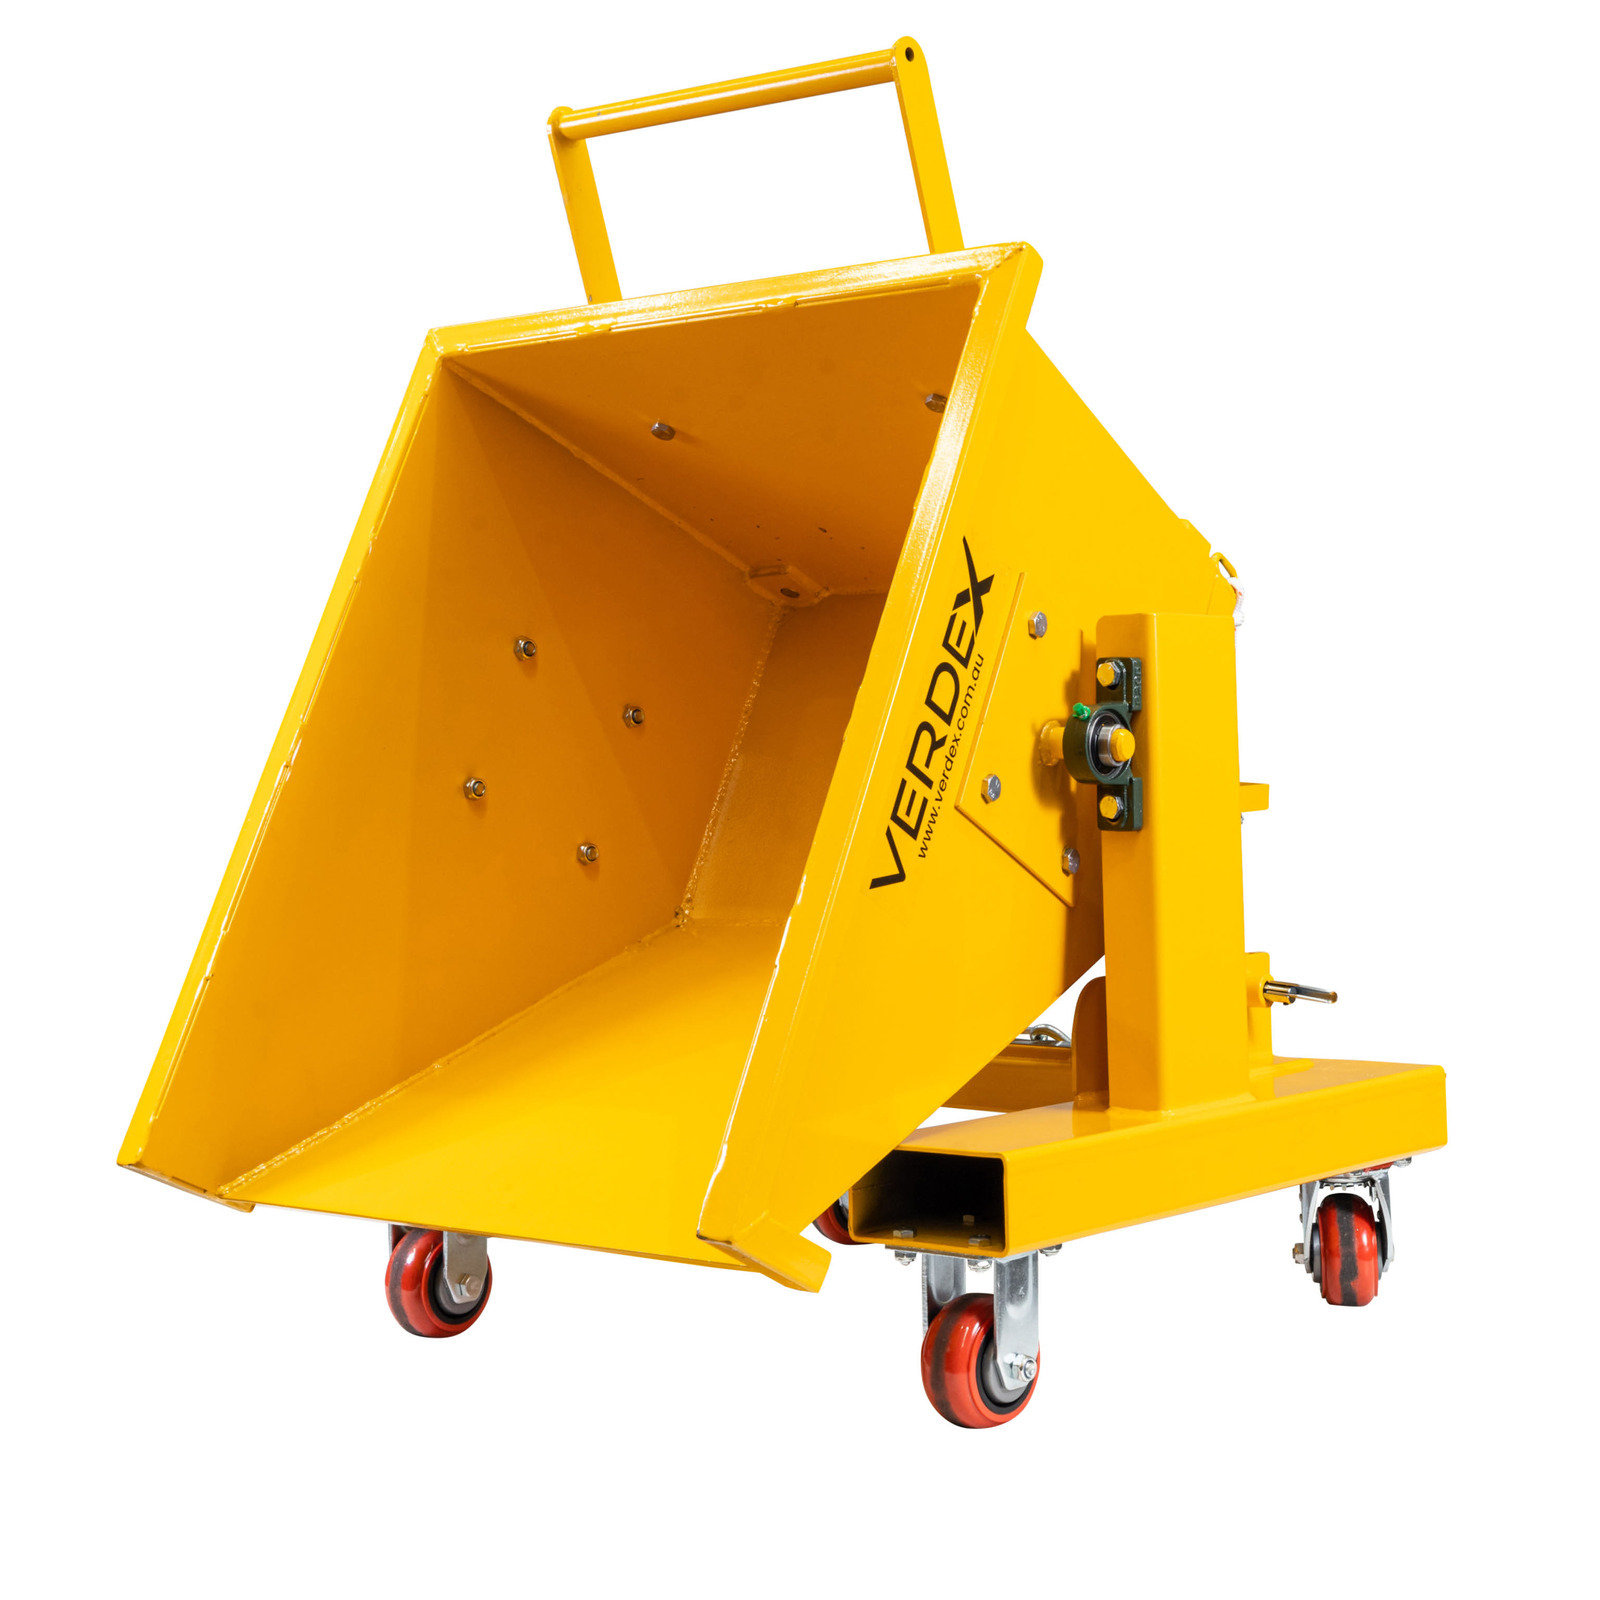 150L Waste Tipping Bin (Yellow Painted)